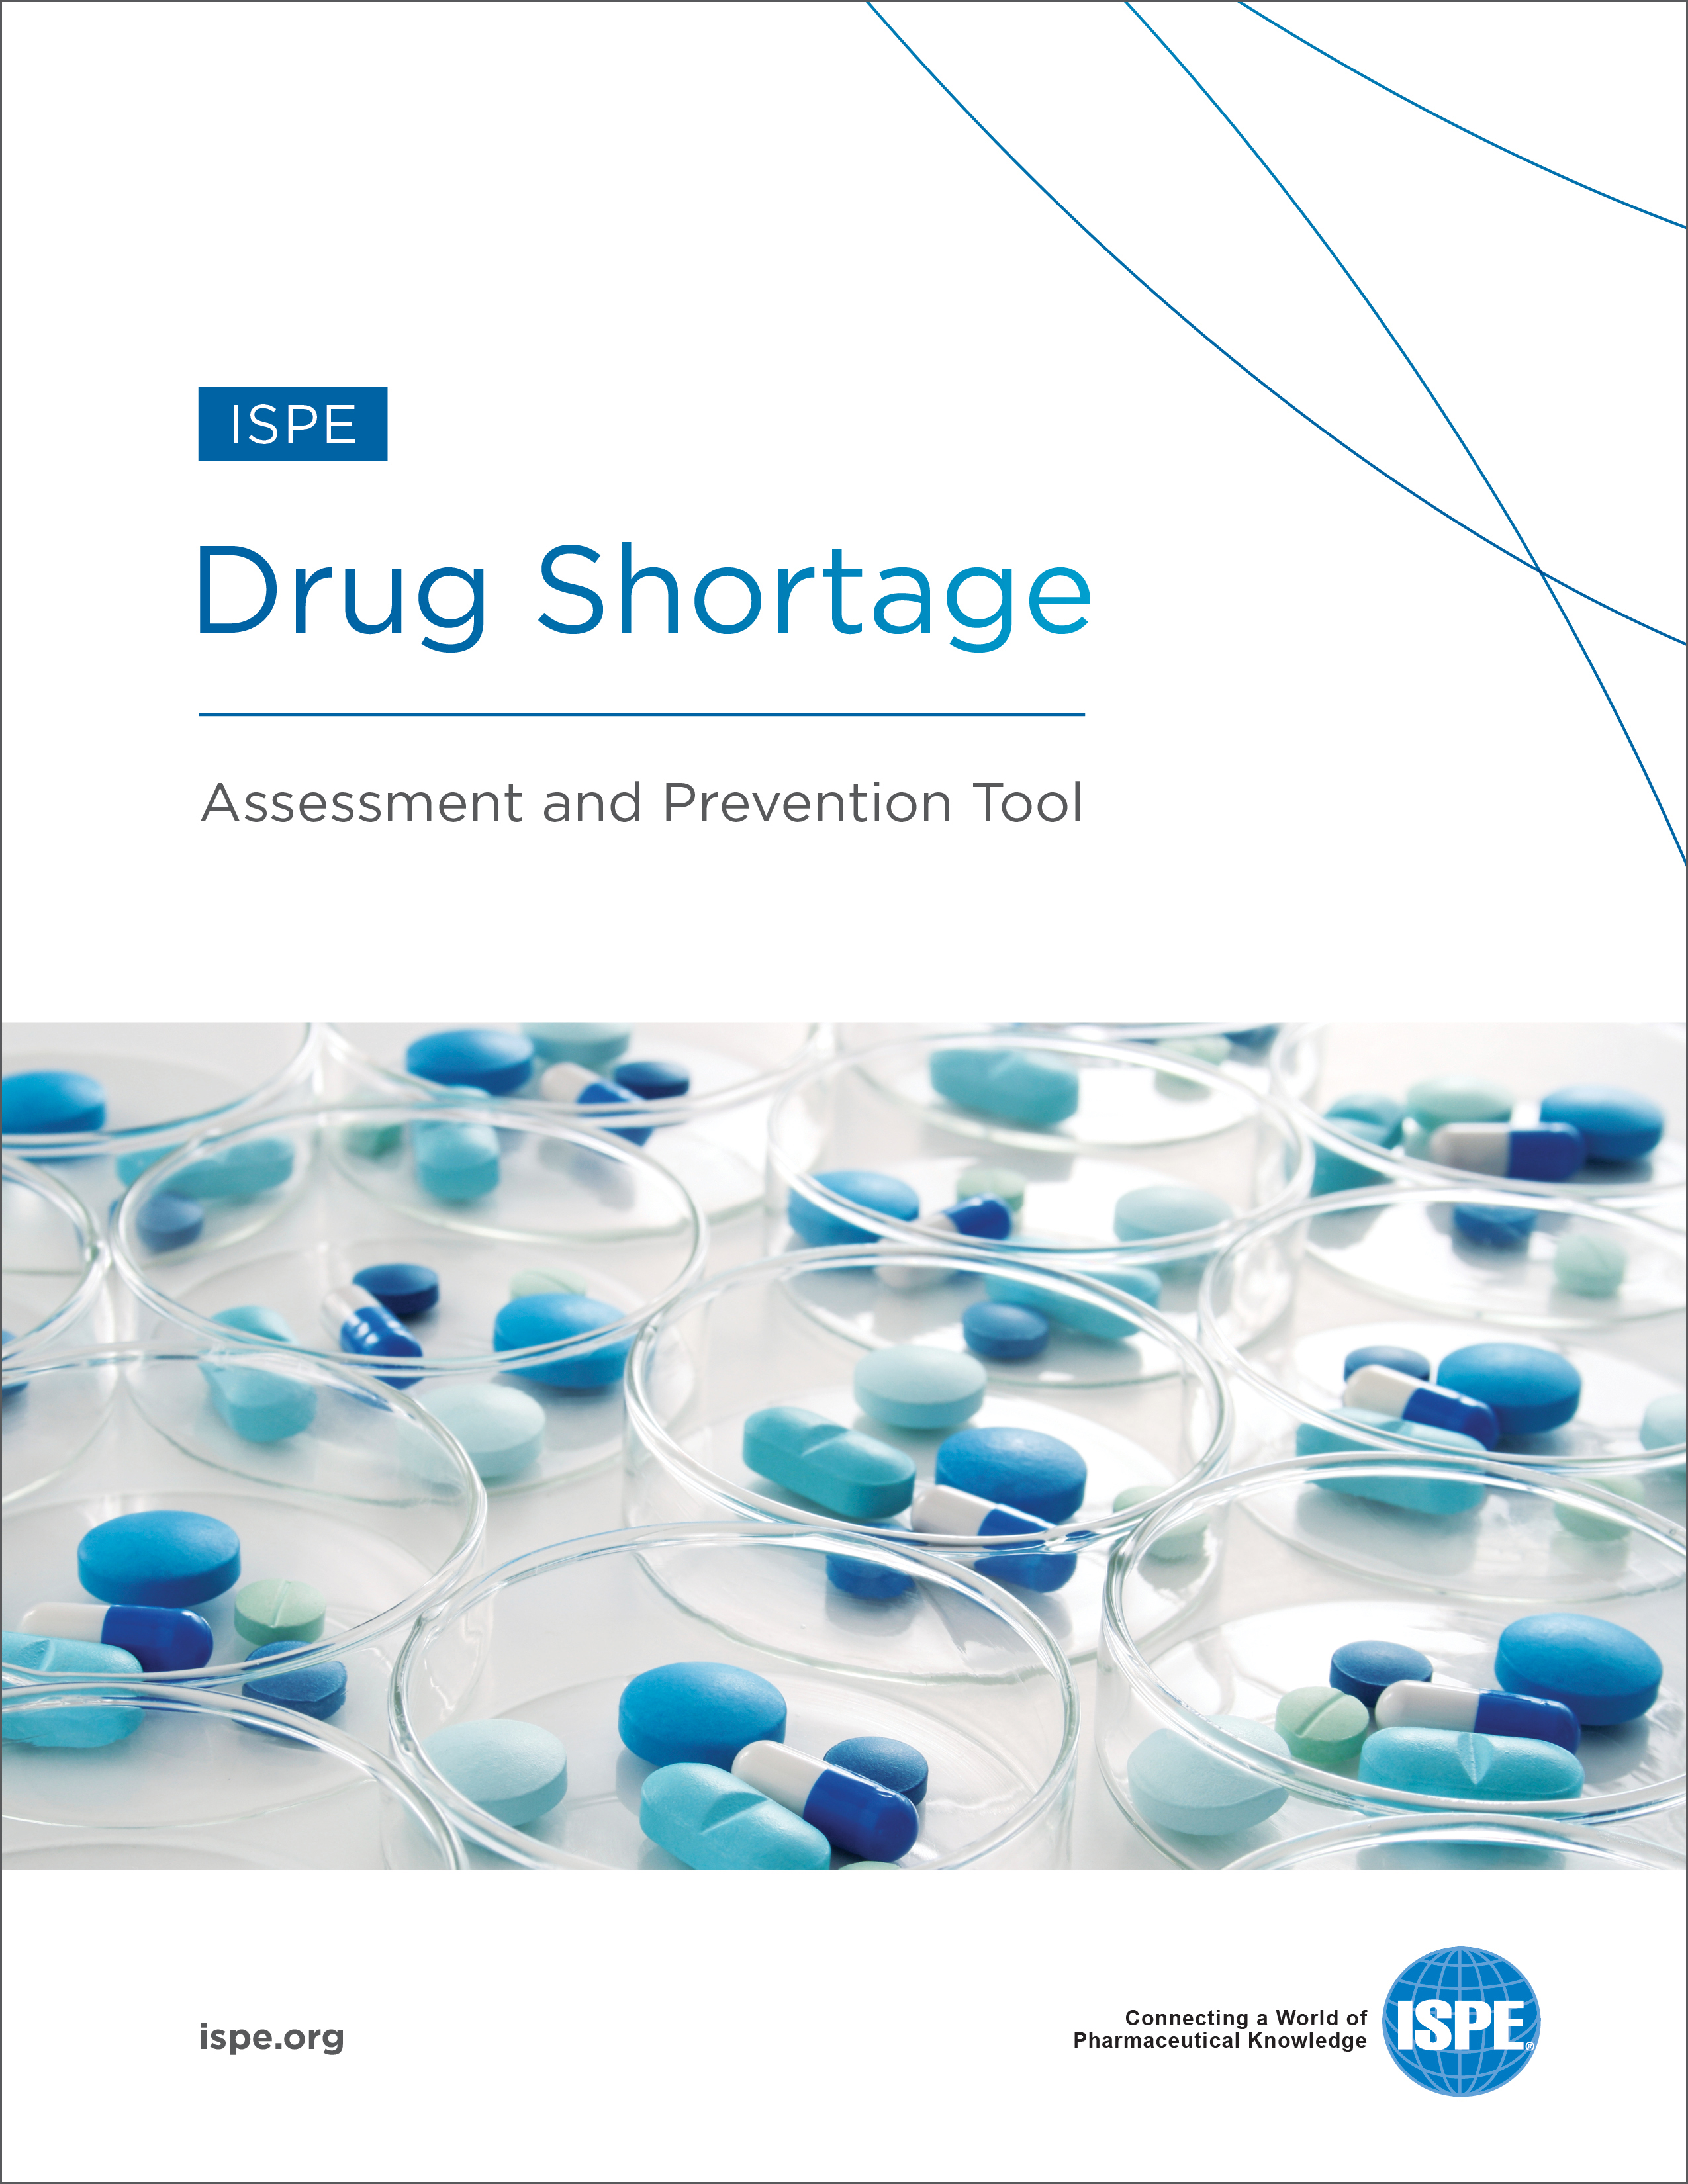 ISPE Debuts Drug Shortage Prevention Tool at Annual Meeting